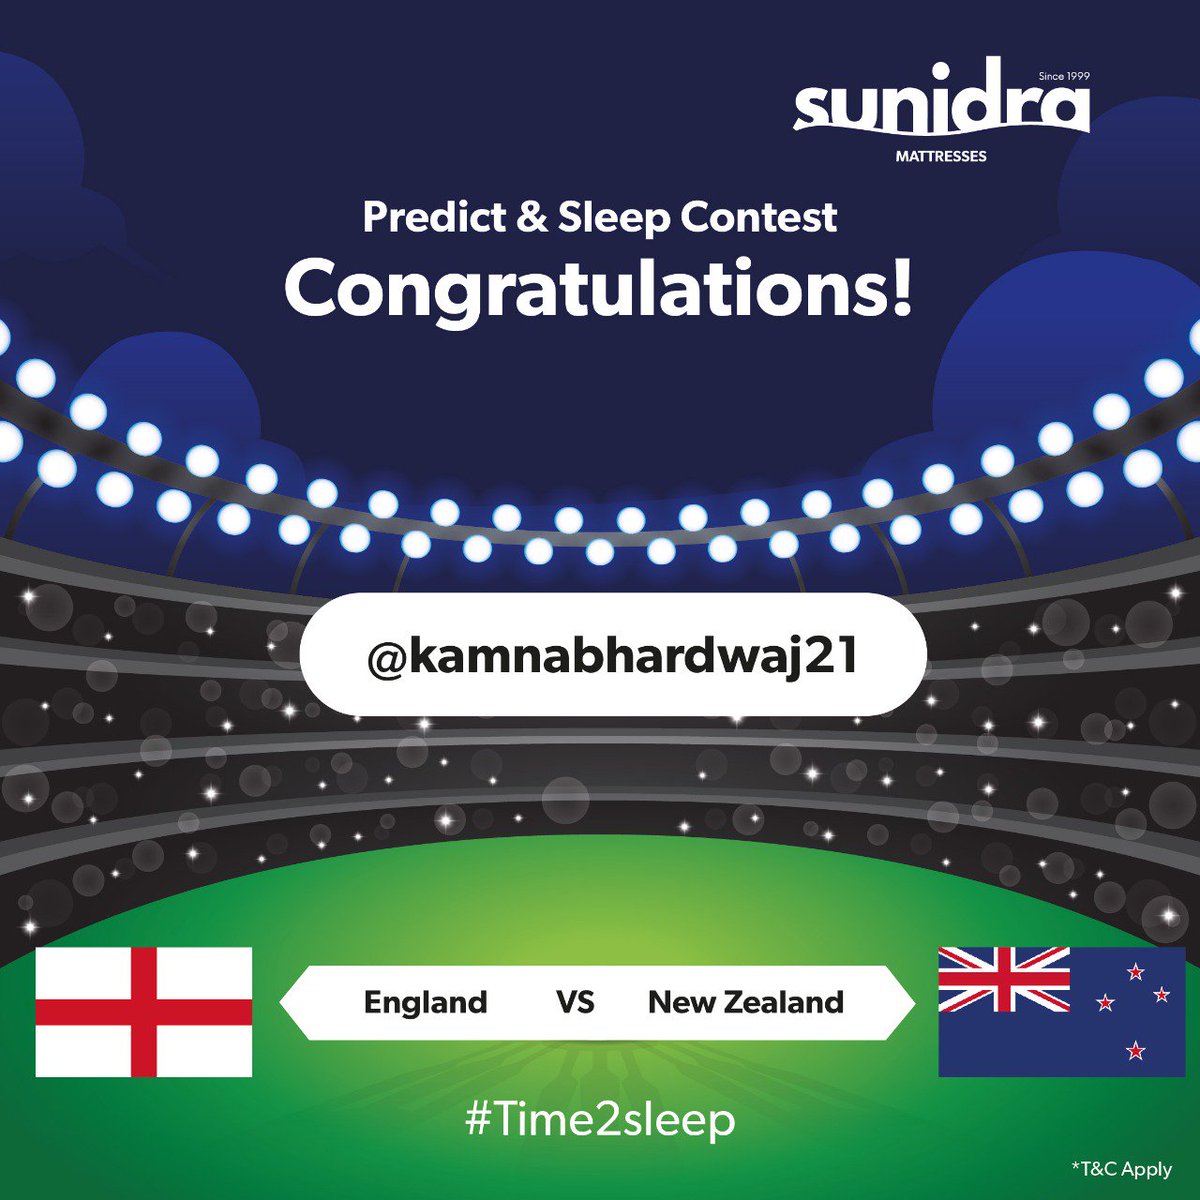 We are happy to announce the winner of our Predict & Sleep Contest. Congratulations . Winner, kindly DM your details.
#ICCWC2019 #ICCWorldCup2019final #ENGvNZ #Sunidra #Time2sleep